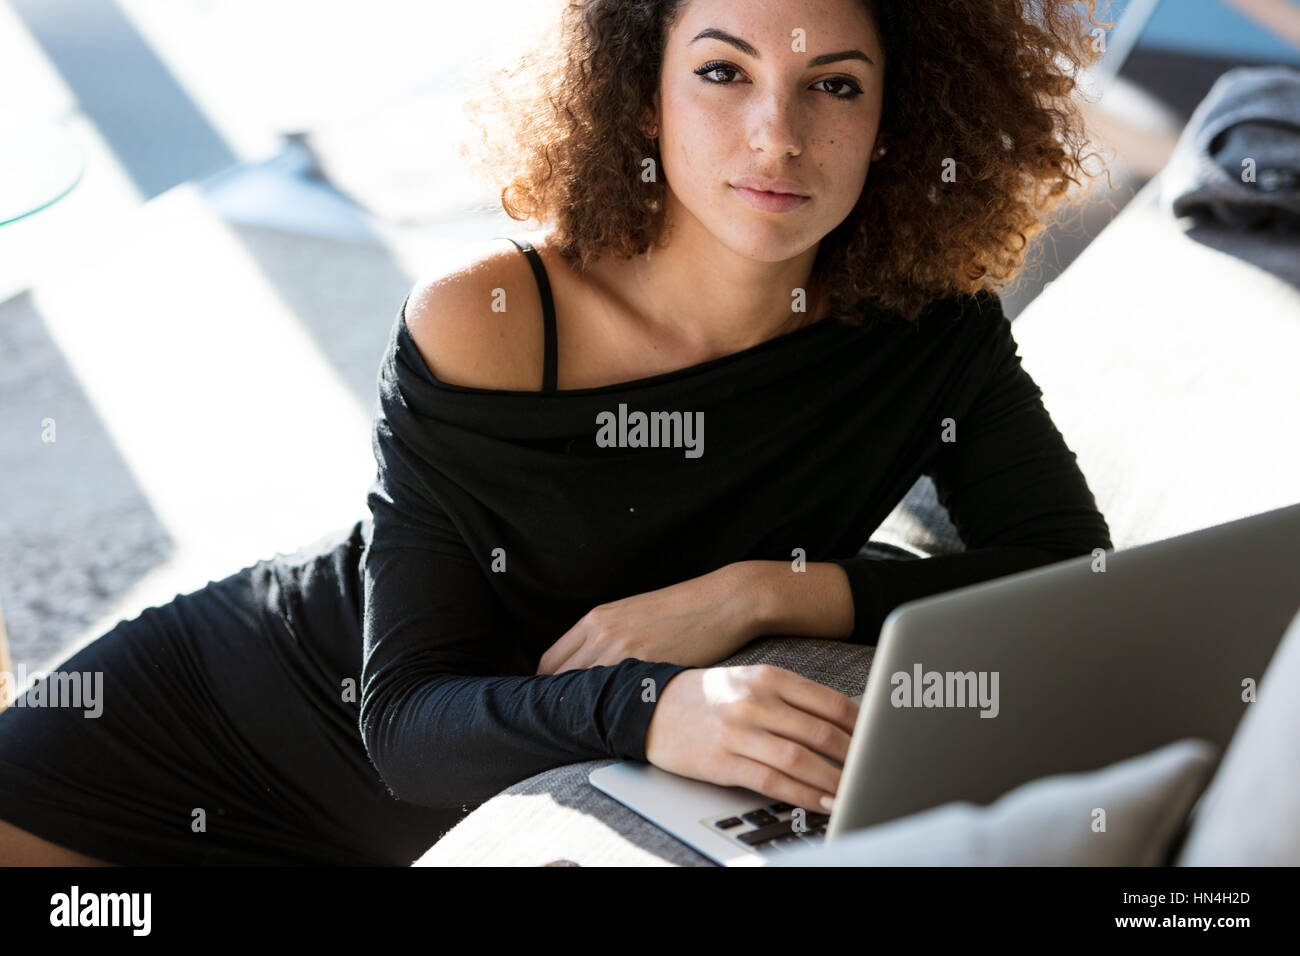 Serious young woman looking attentively at the camera with a calm expression as though waiting for something while working on a laptop Stock Photo